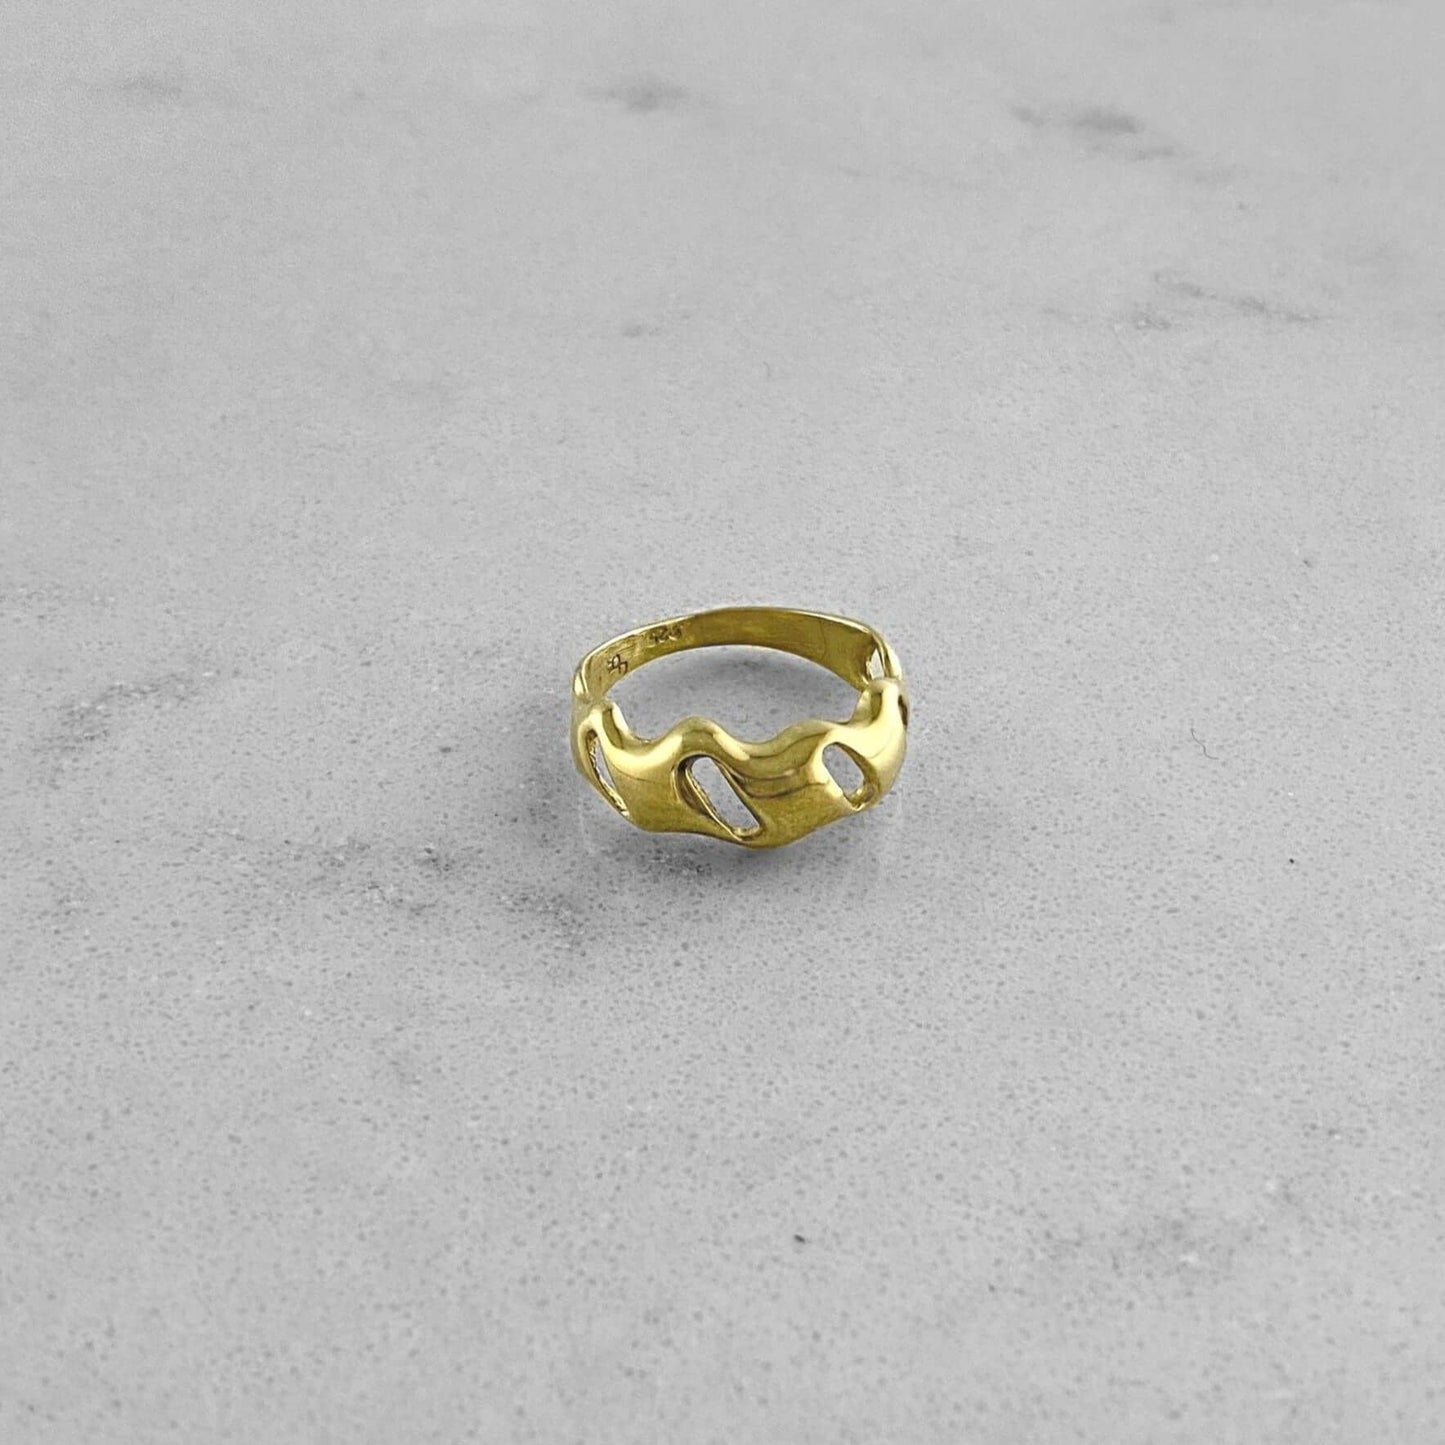 Product photo of a gold ring by Aur Studio